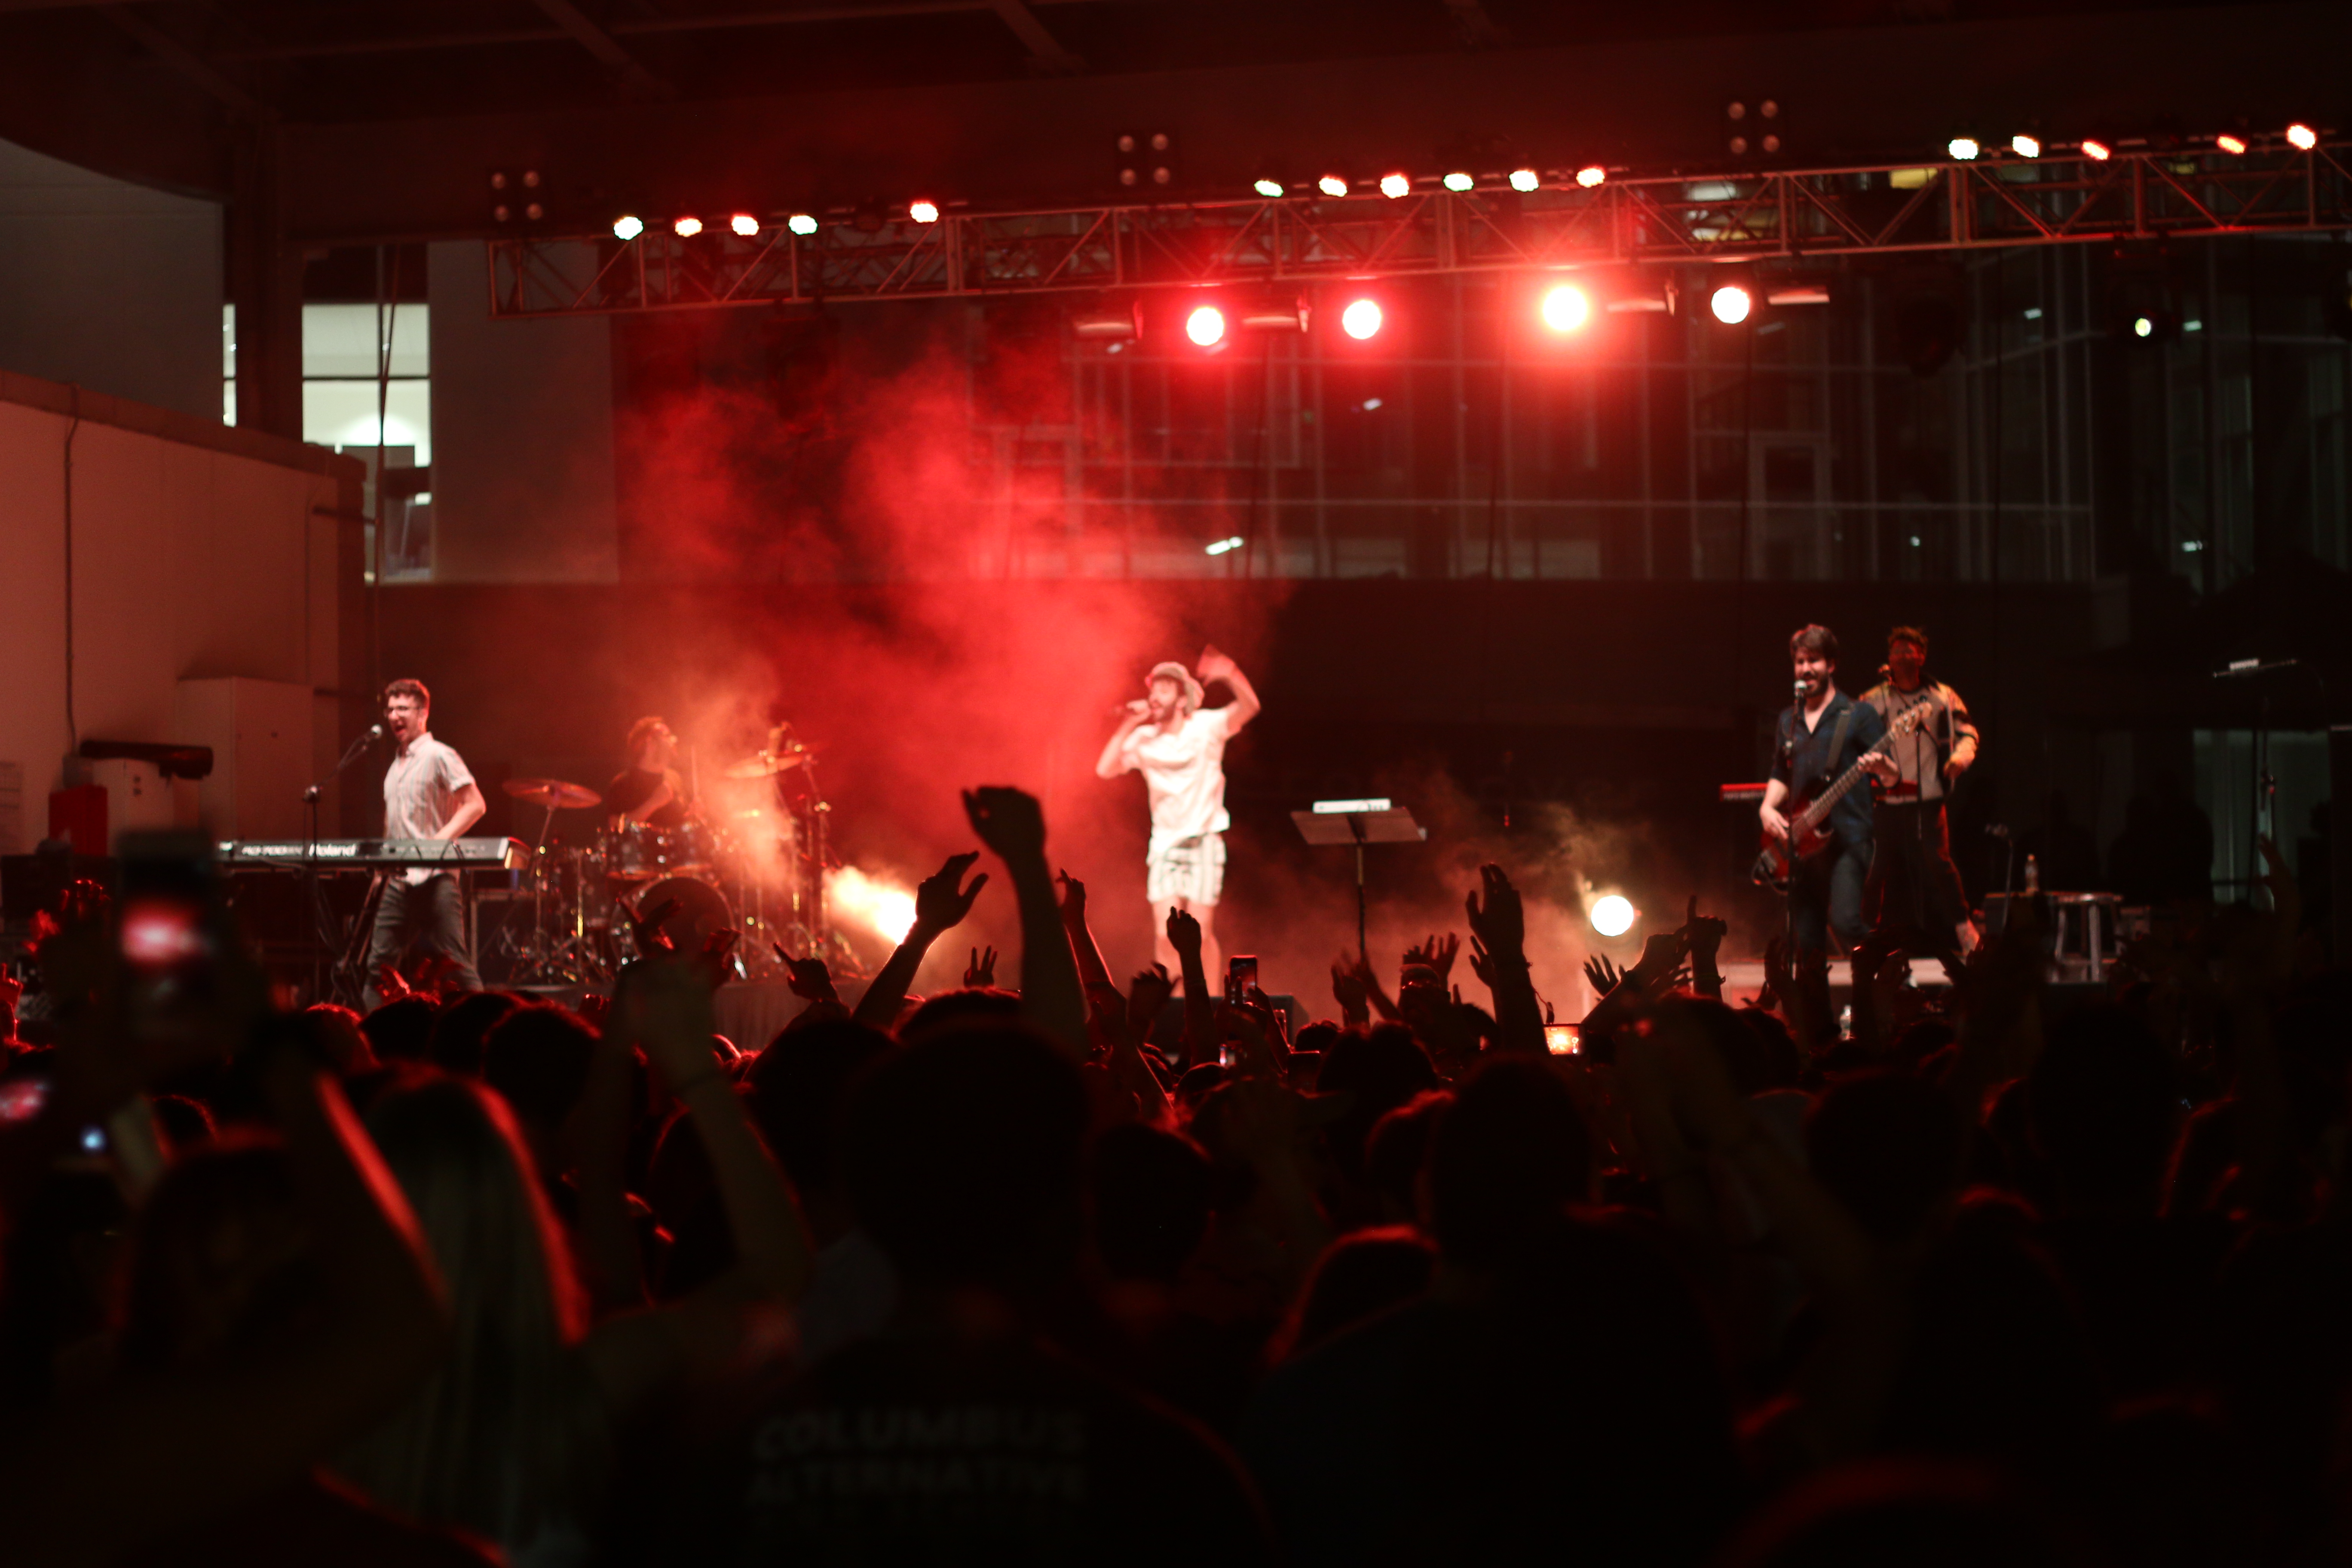 AJR Brings Boisterous Entertainment and Electronic Hits to Emory